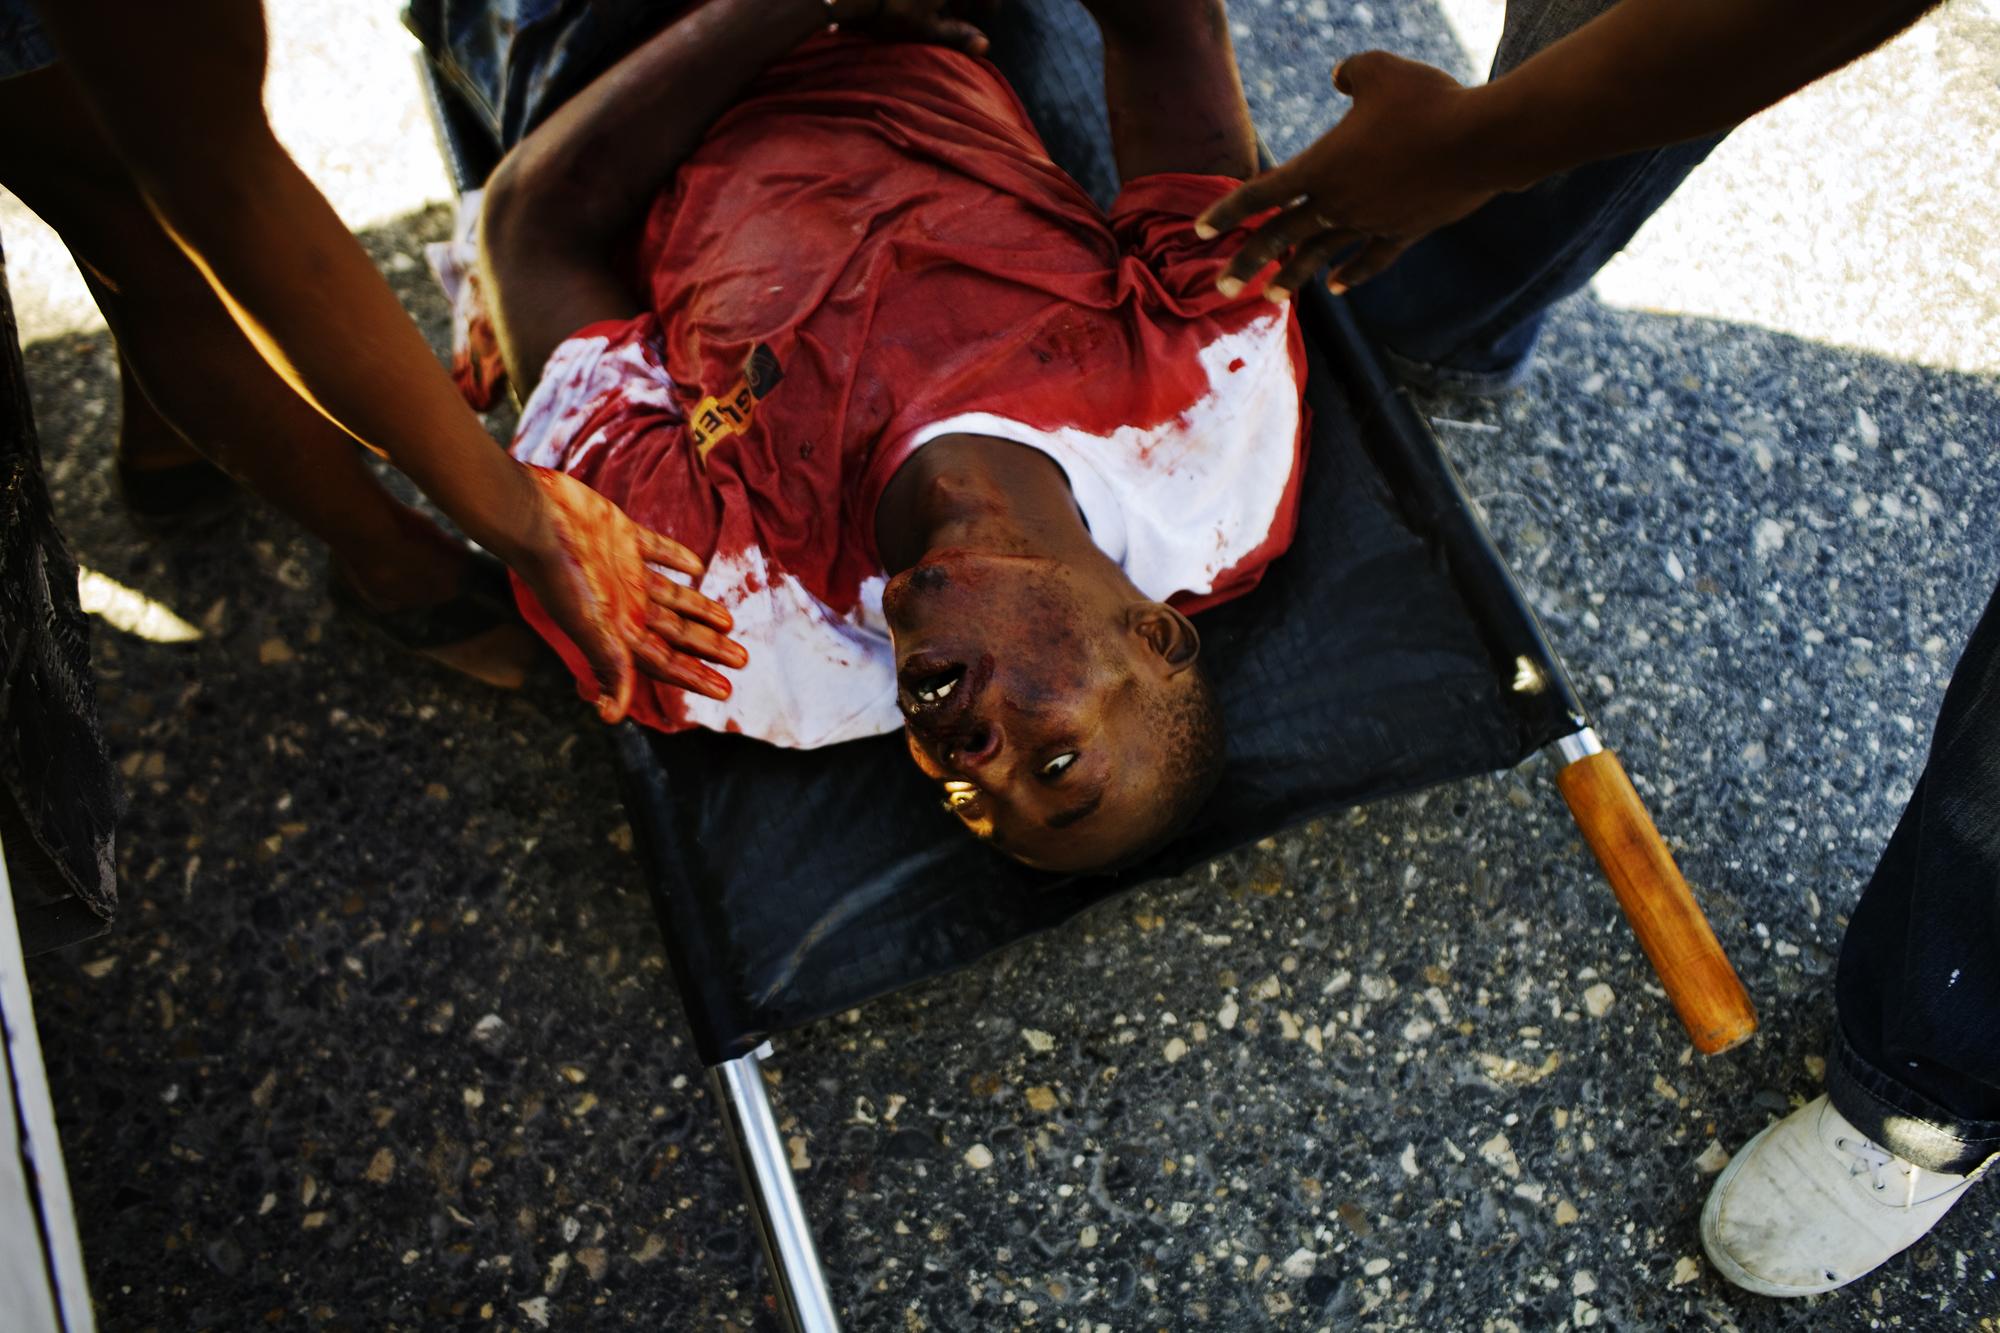 Haiti for MSF - HAITI Martissant, Port-au-Prince
A dying man in an MSF...